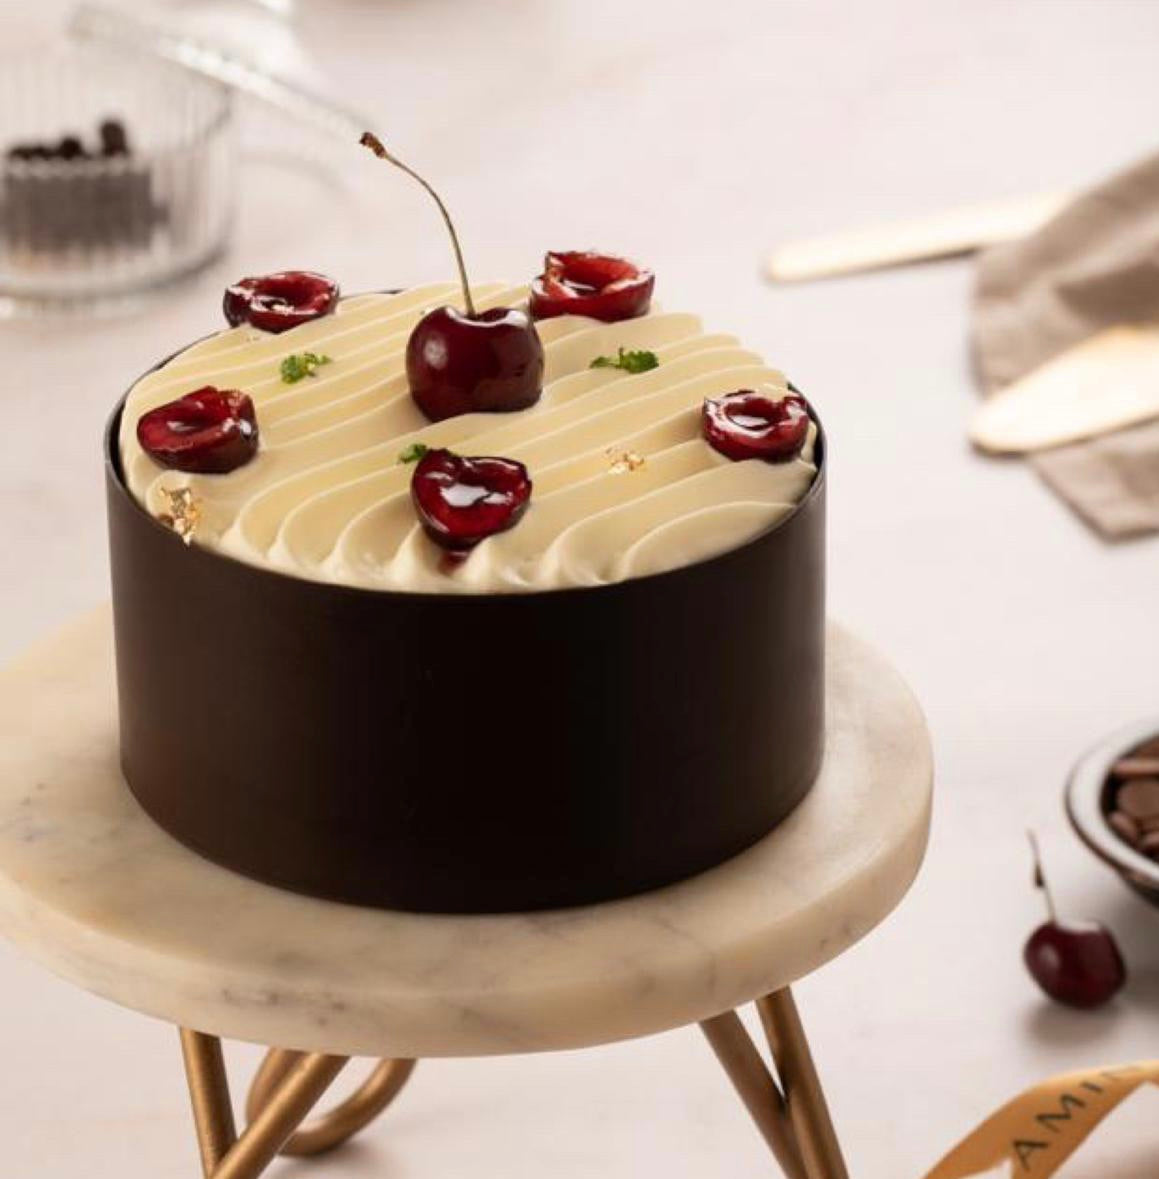 Chocolate Ribbion Cake, 24x7 Home delivery of Cake in Heritage City, Gurgaon